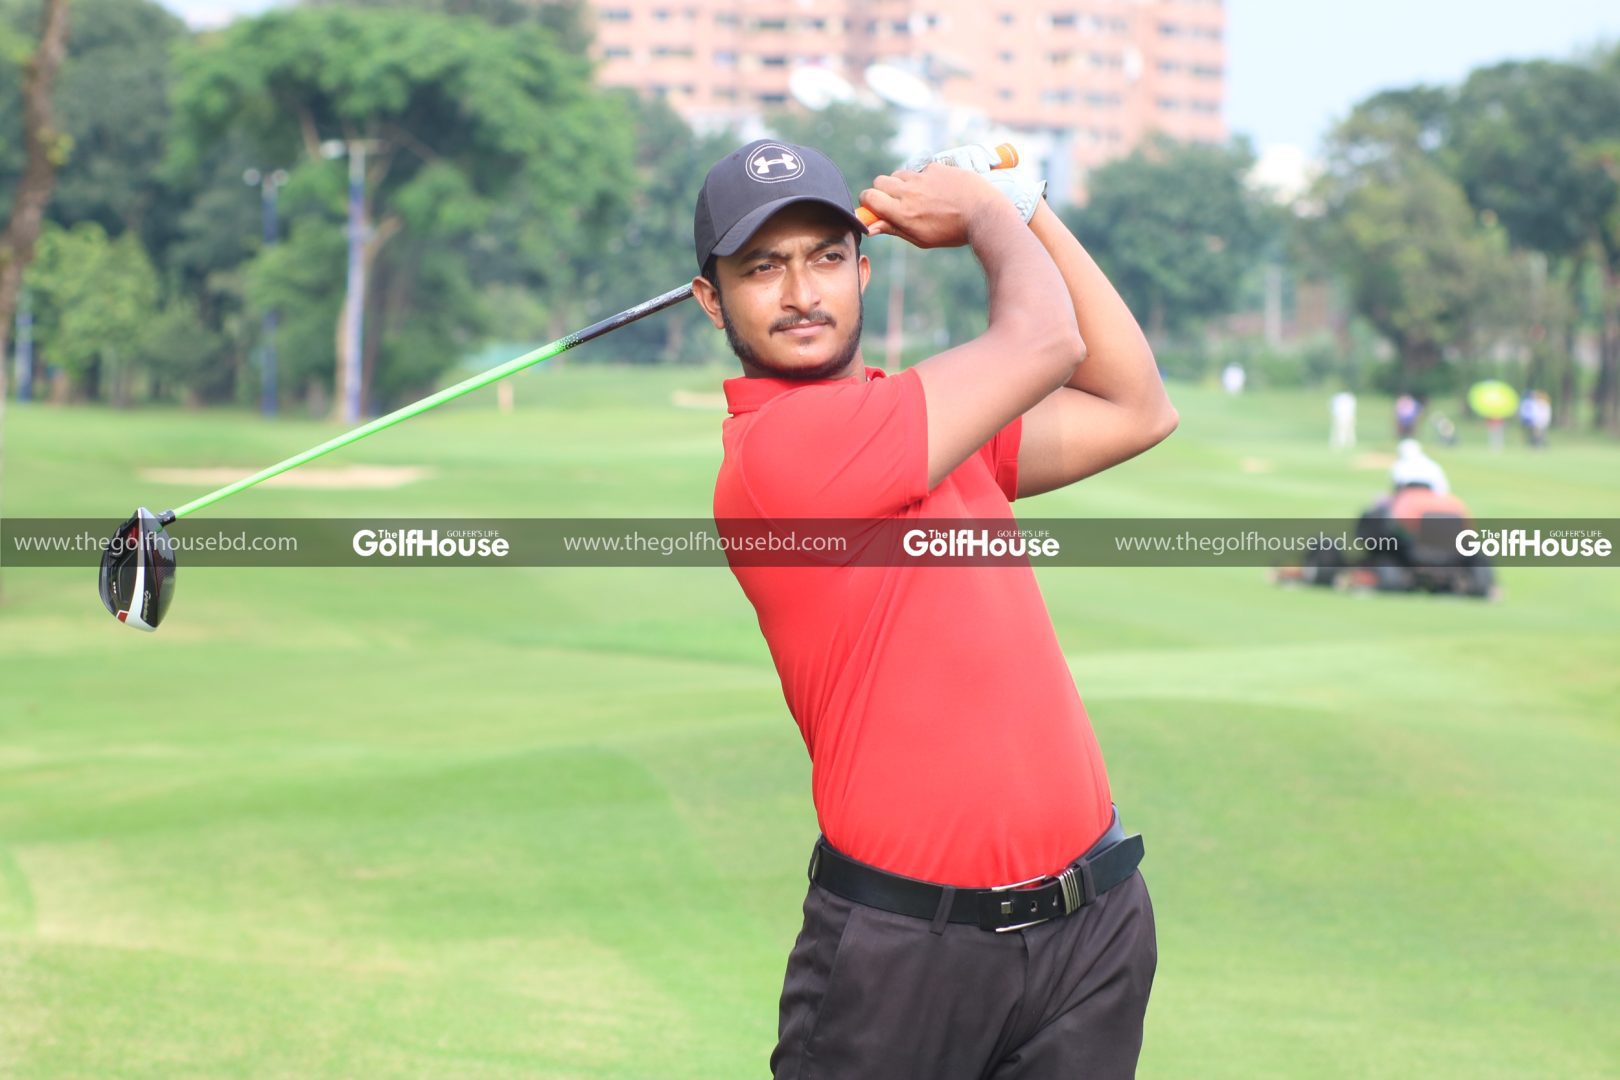 Moinul_Hossain_is_a_young_and_promising_golfer_from_Chittagong_The_amateur_golfer_has_a_real_sense_of_dedication_and_ambition_as_he_wants_to_reach_the_best_stage_in_golf.